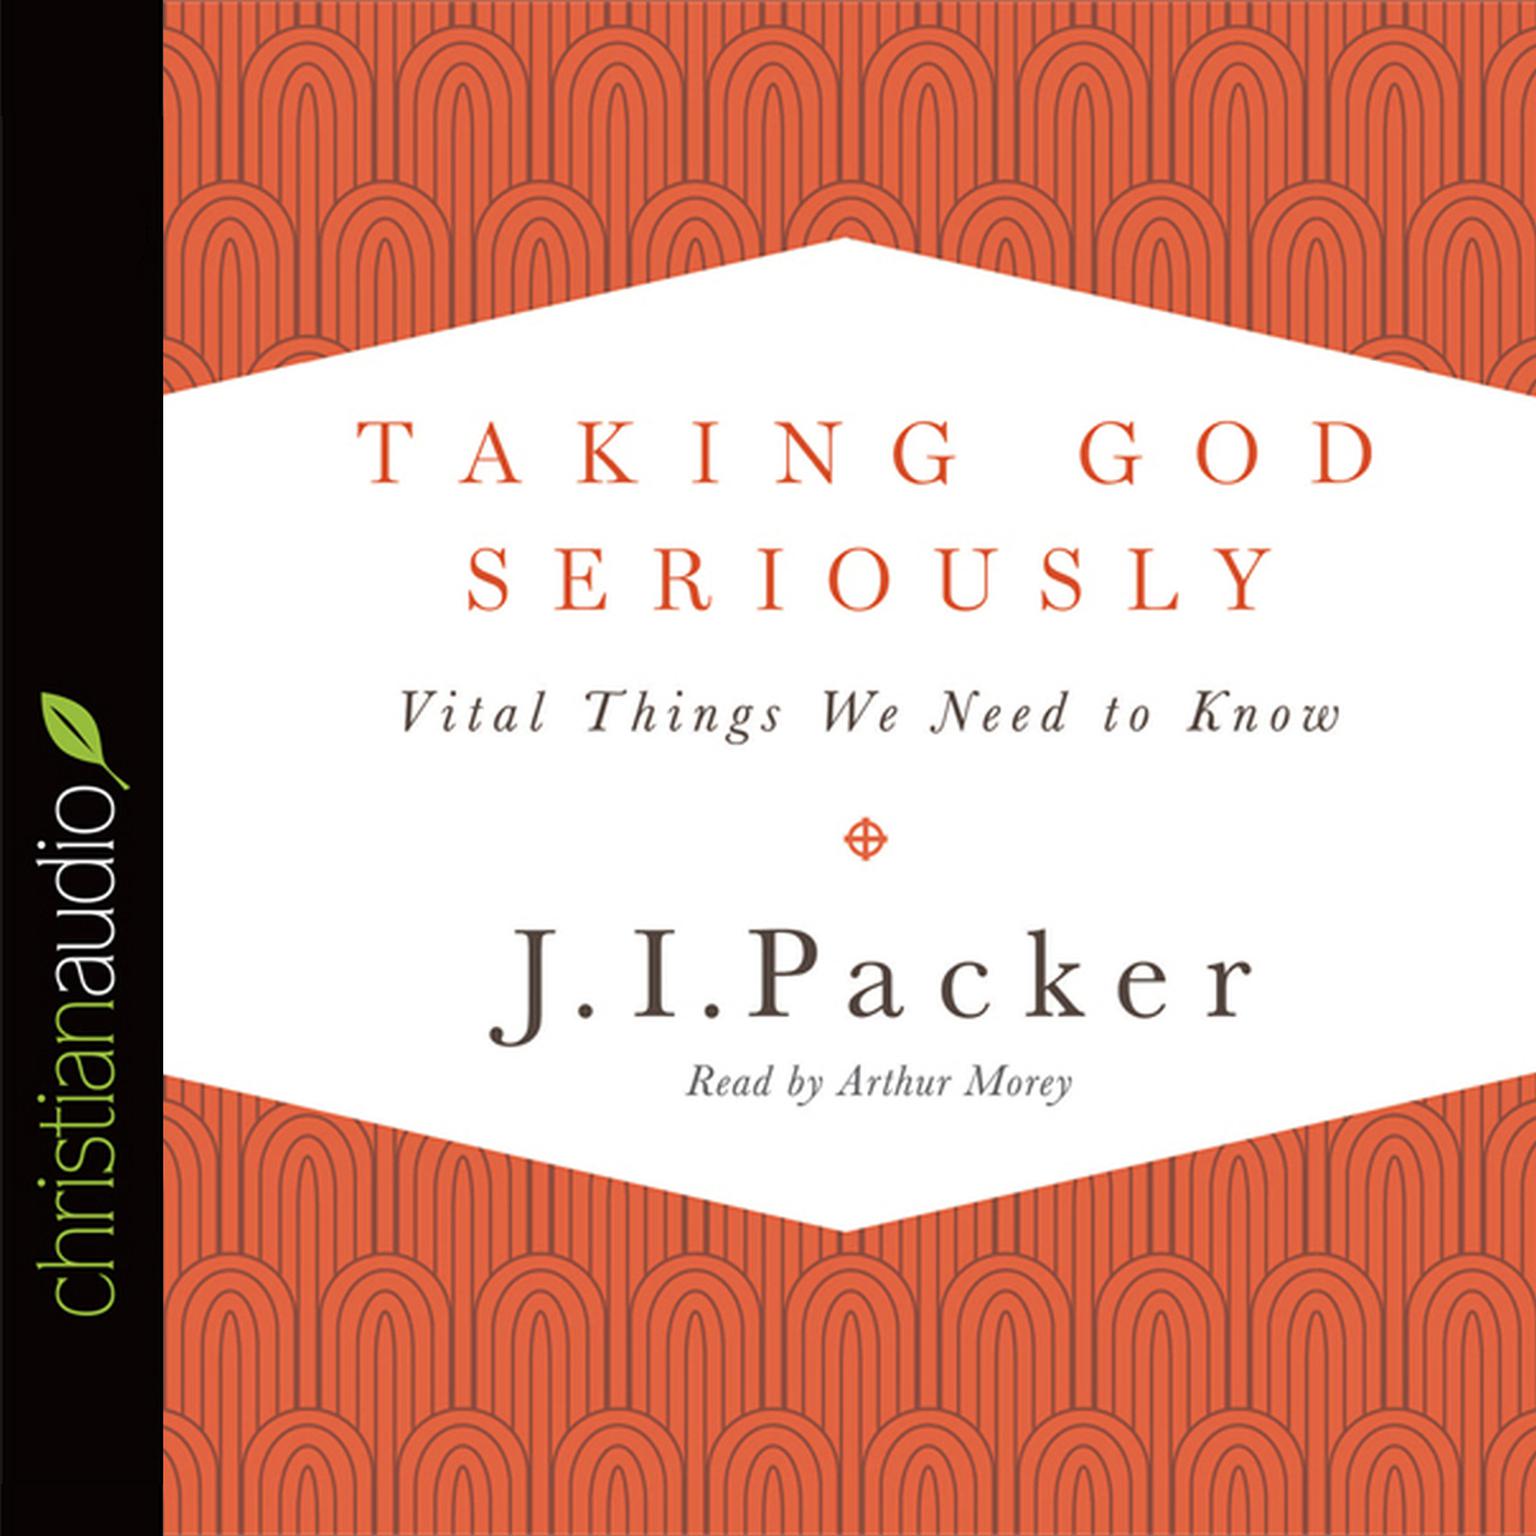 Taking God Seriously: Vital Things We Need to Know Audiobook, by J. I. Packer